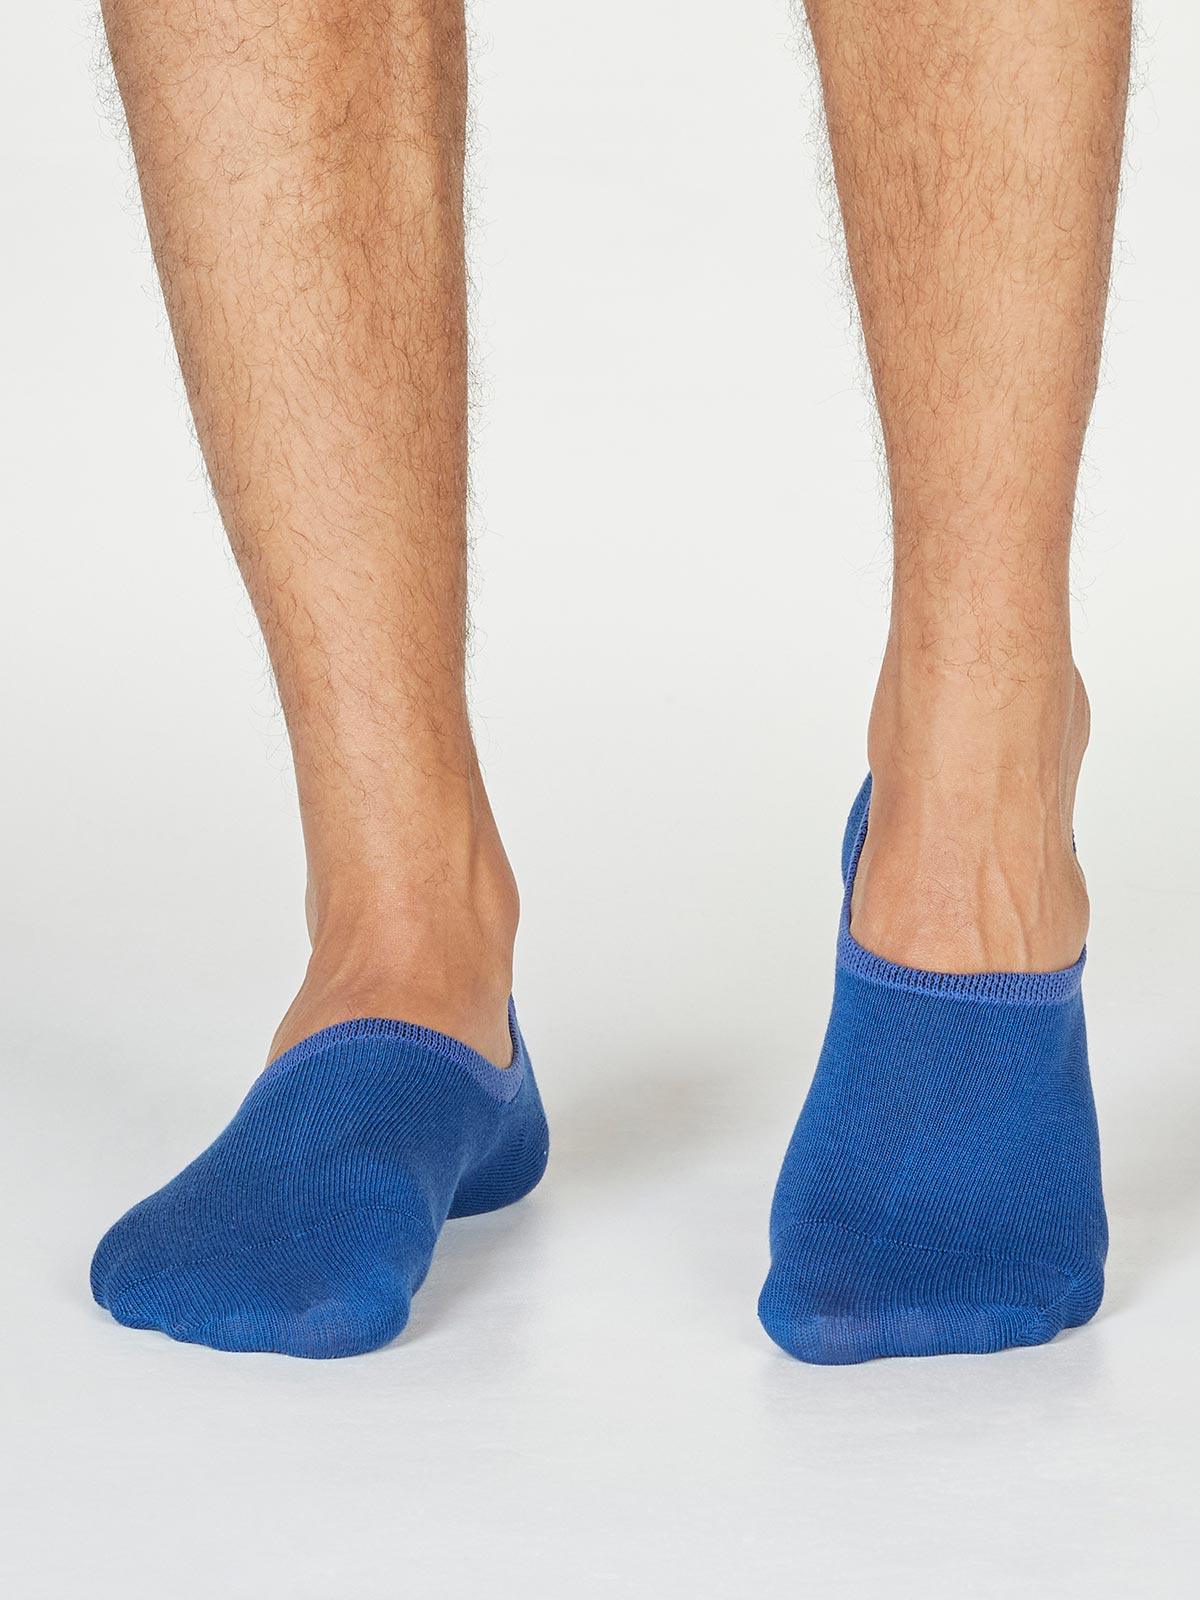 No Show Men's Invisible Socks - Thought Clothing UK